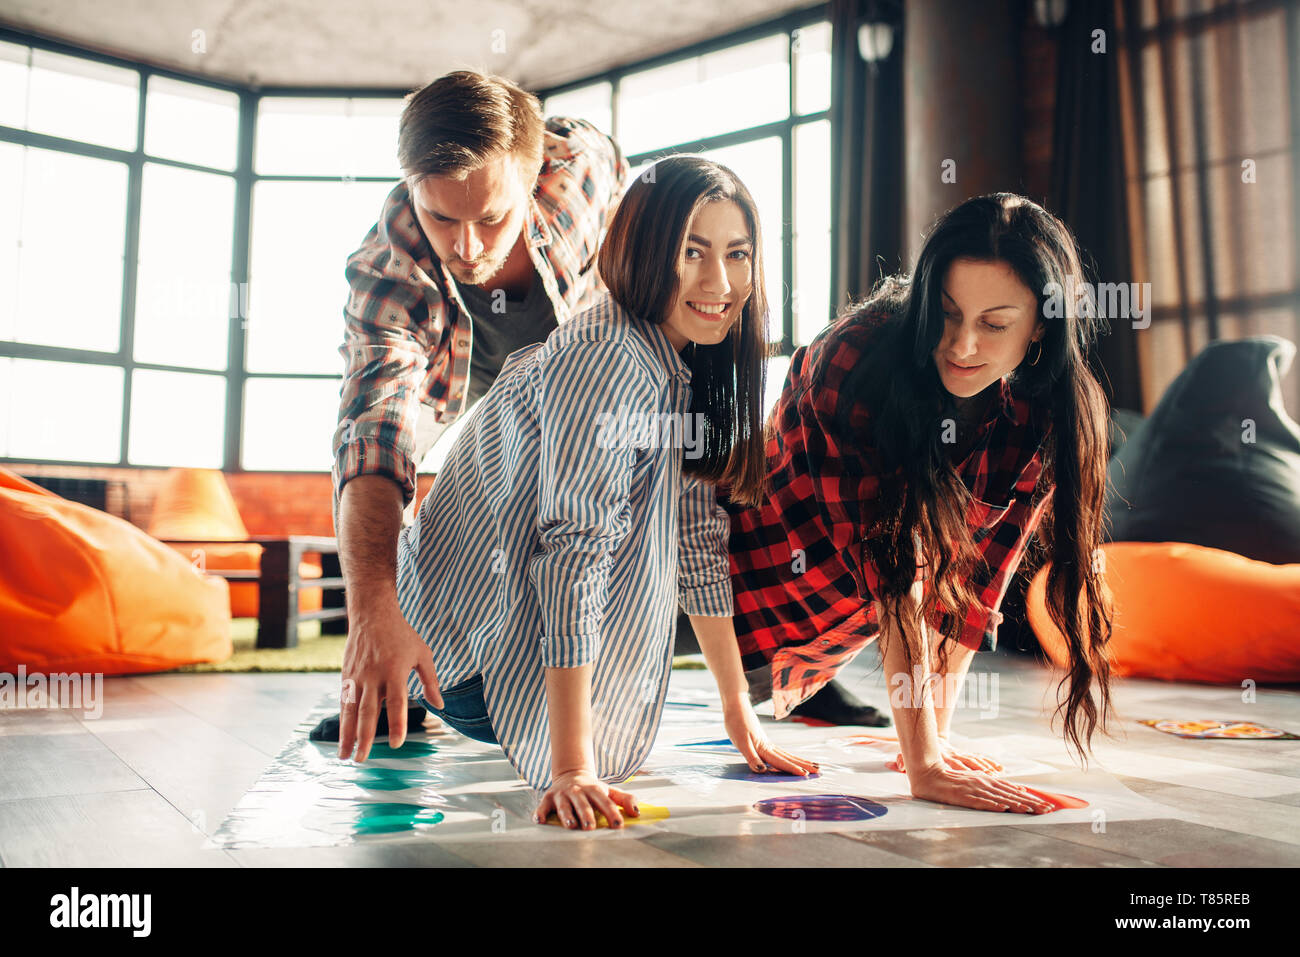 Group of students playing twister game Stock Photo